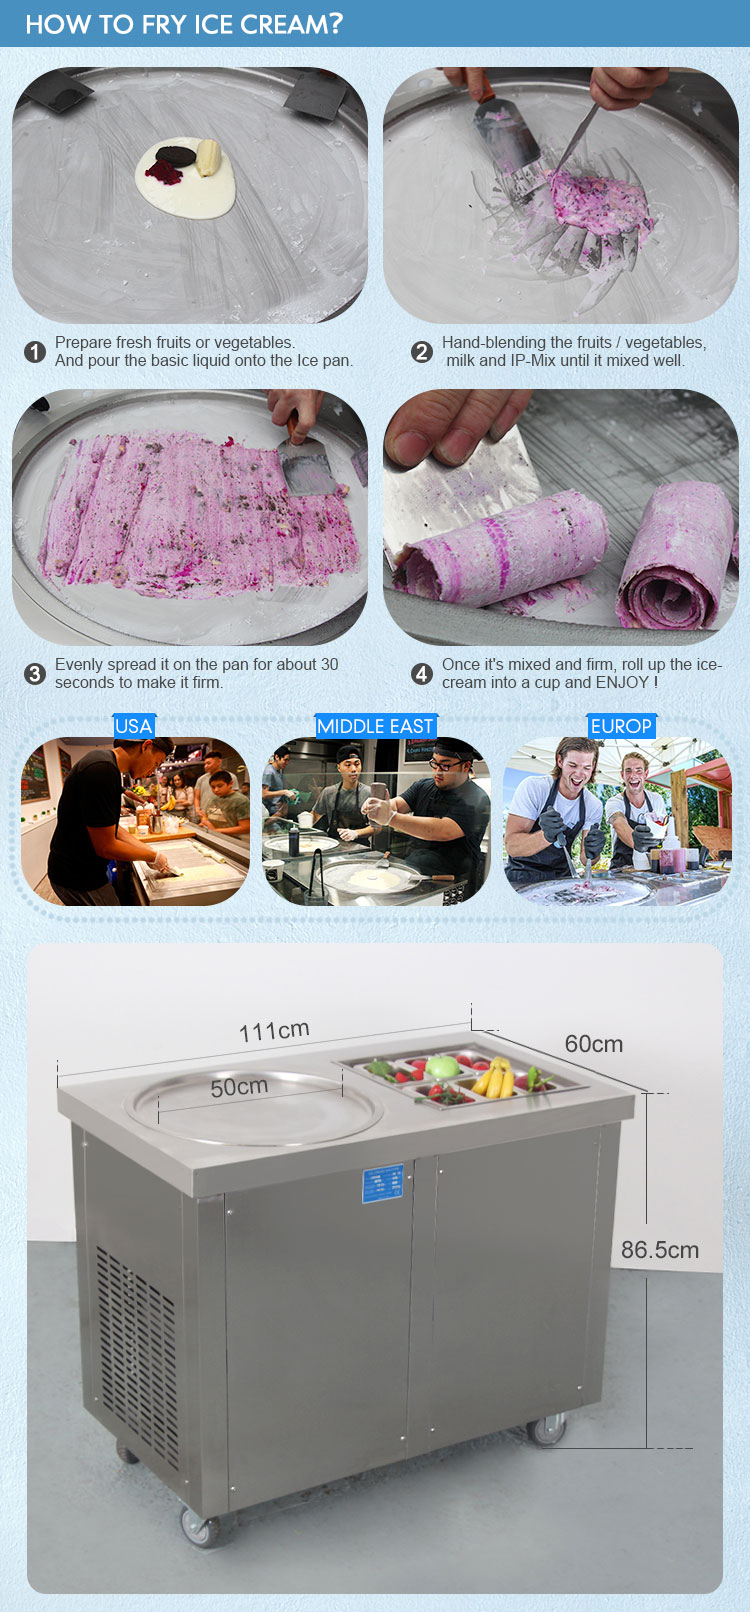 Mexico Taco Commercial Fried Fry Roll Ice Cream Machine/Rolled Ice Cream Machine/Ice Cream Roll Pan Machine with CE Rohs ETL - Fried Ice Cream Machine - 5